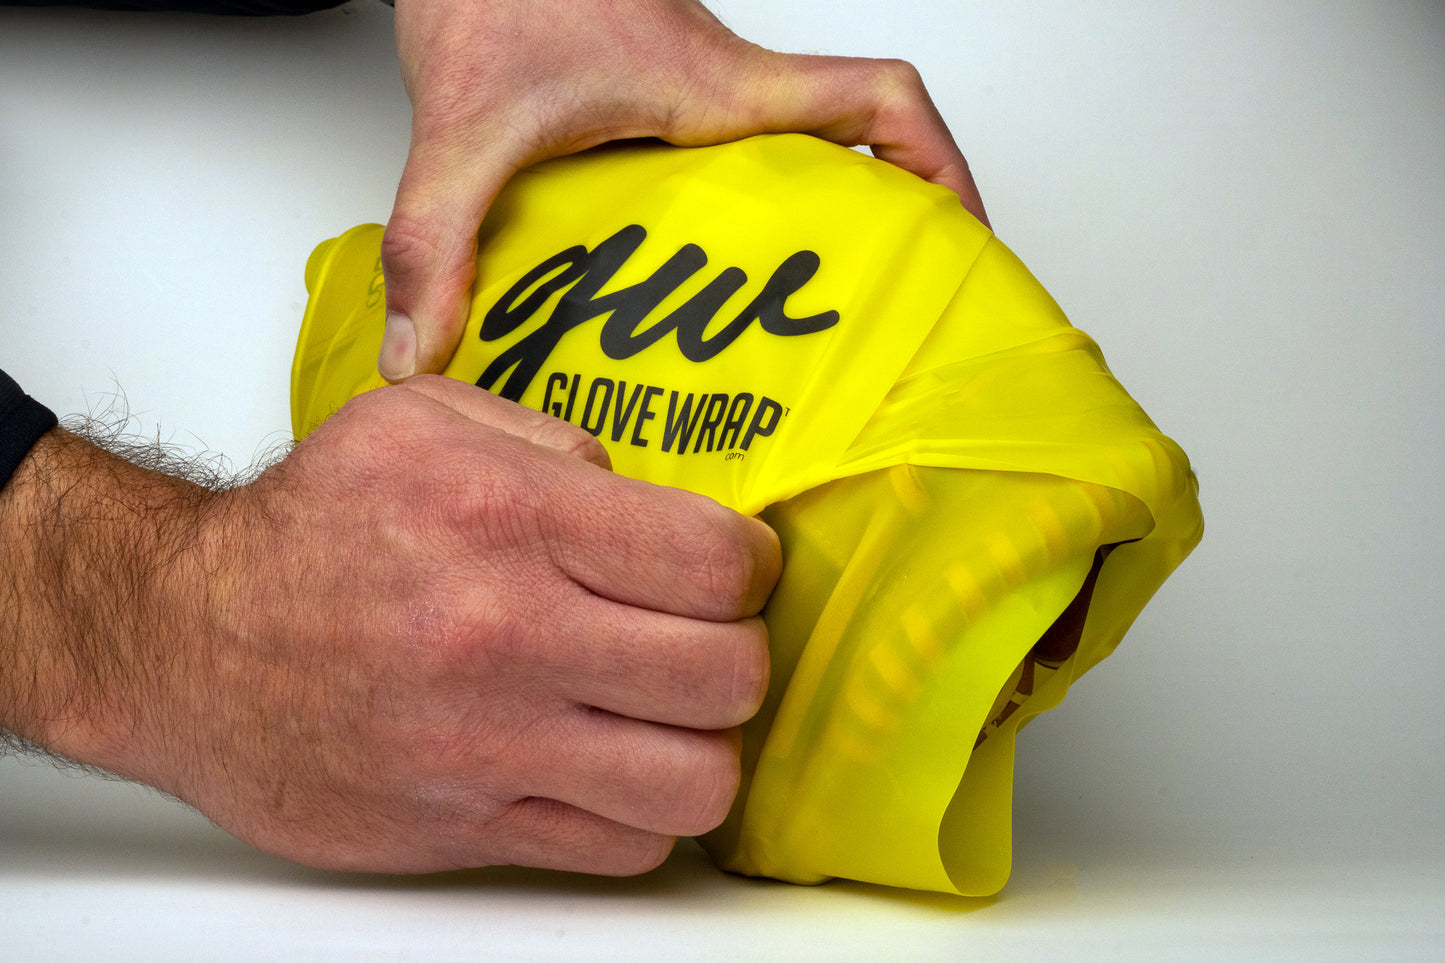 Gloves for wrap install » CWS